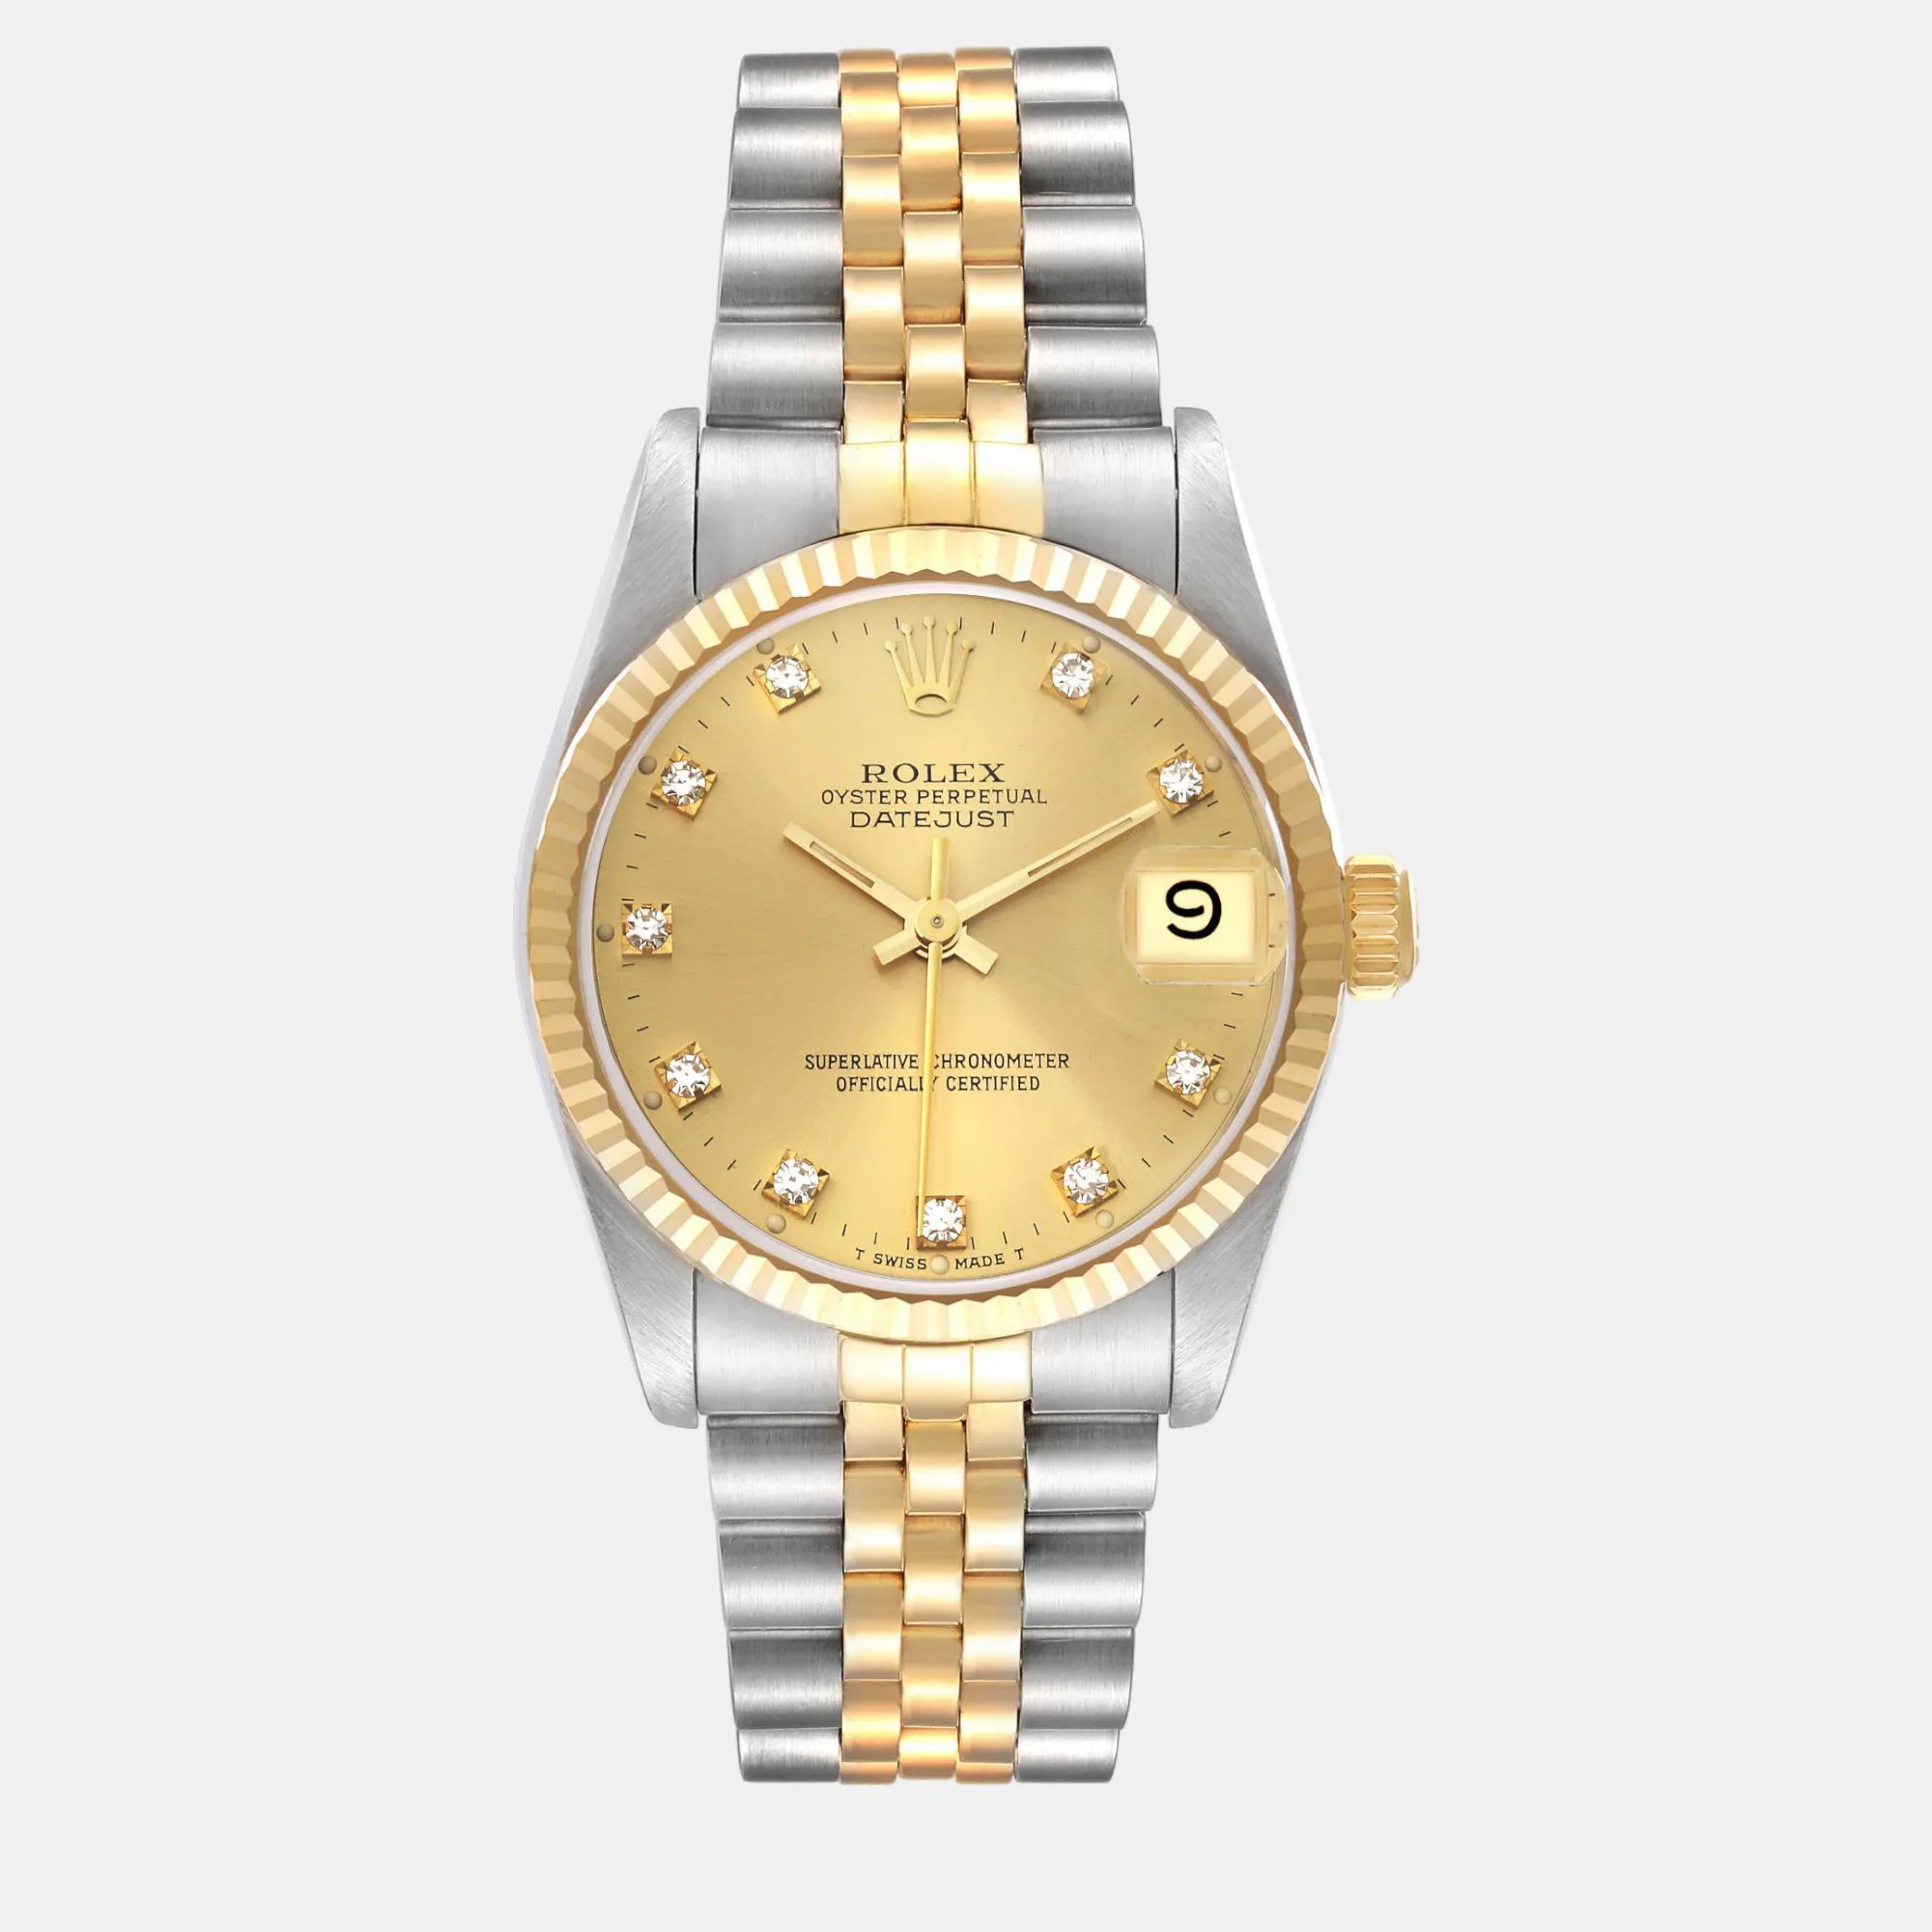 Rolex Datejust 31mm Yellow gold and stainless steel